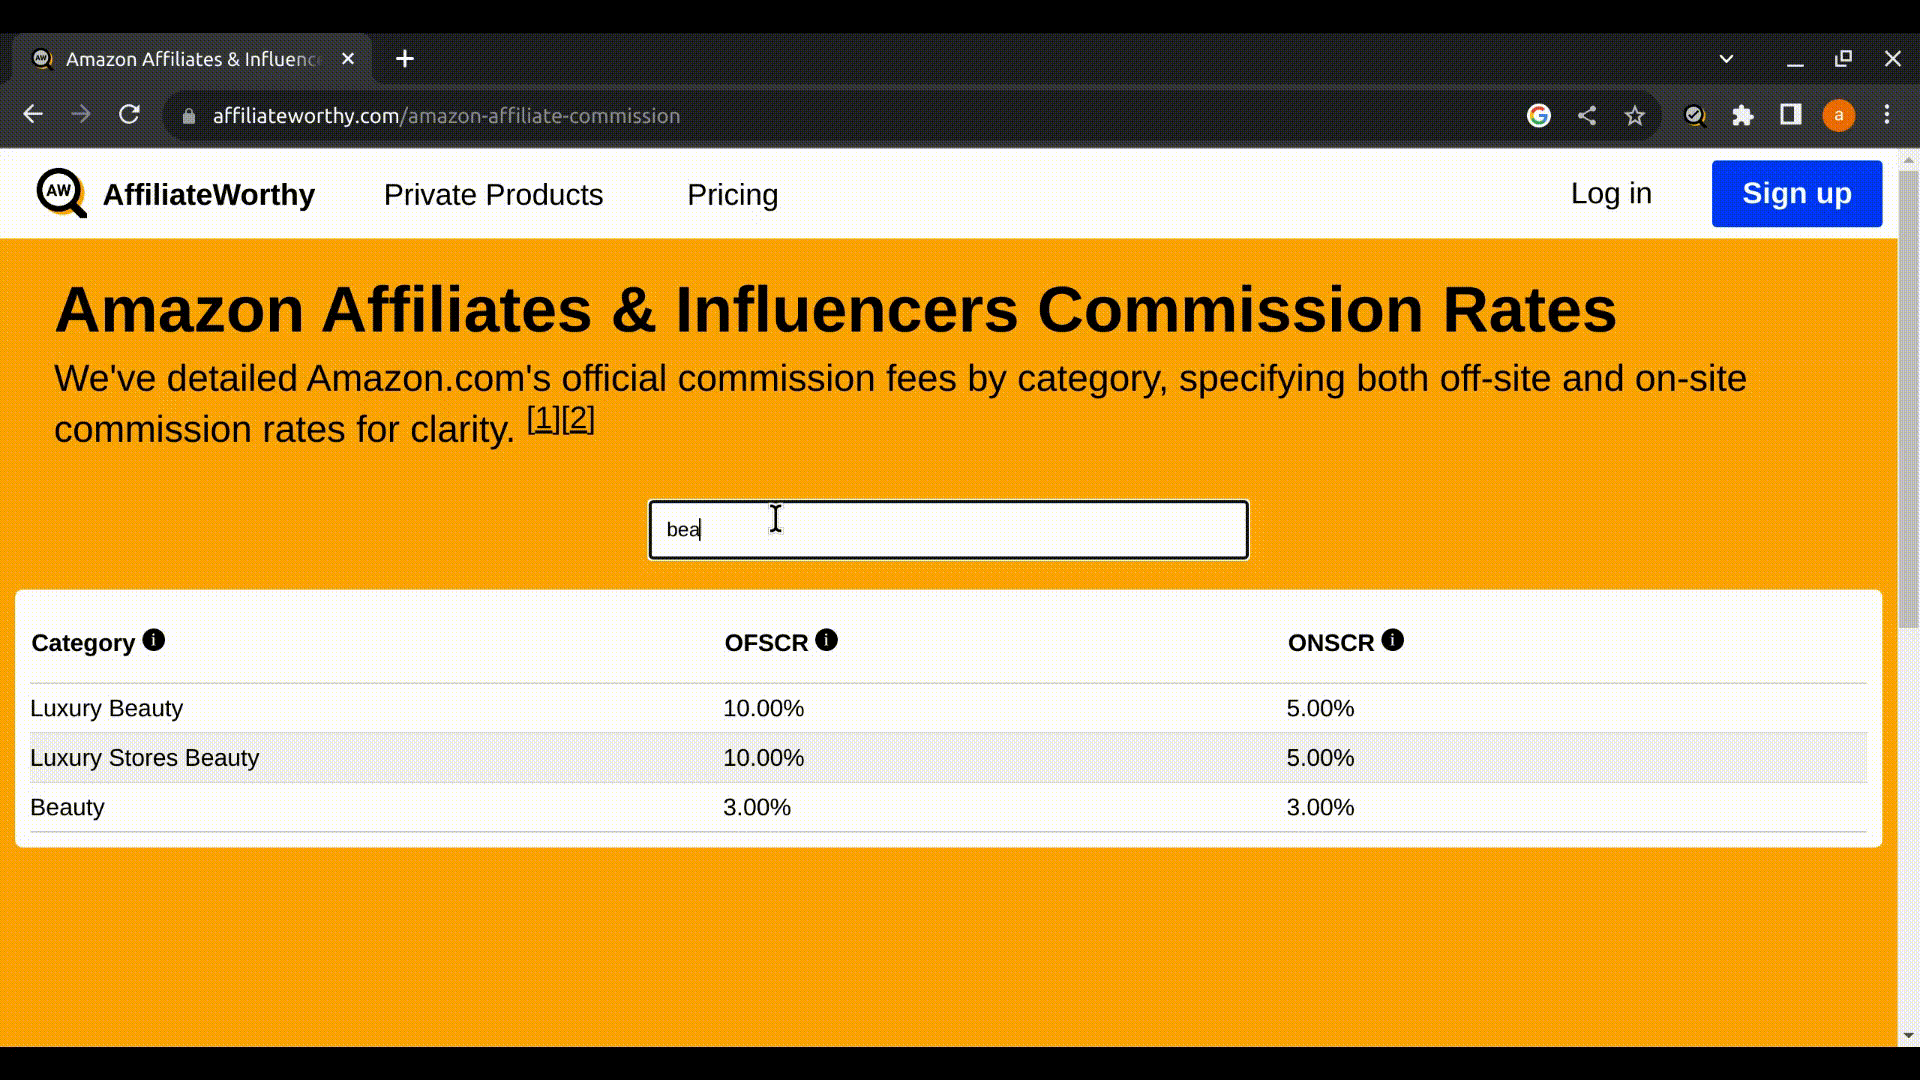 Demonstration of how to search for categories and their onsite and offsite commissions, with AffiliateWorthy's searchable Amazon Influencer Commission Rates Table.